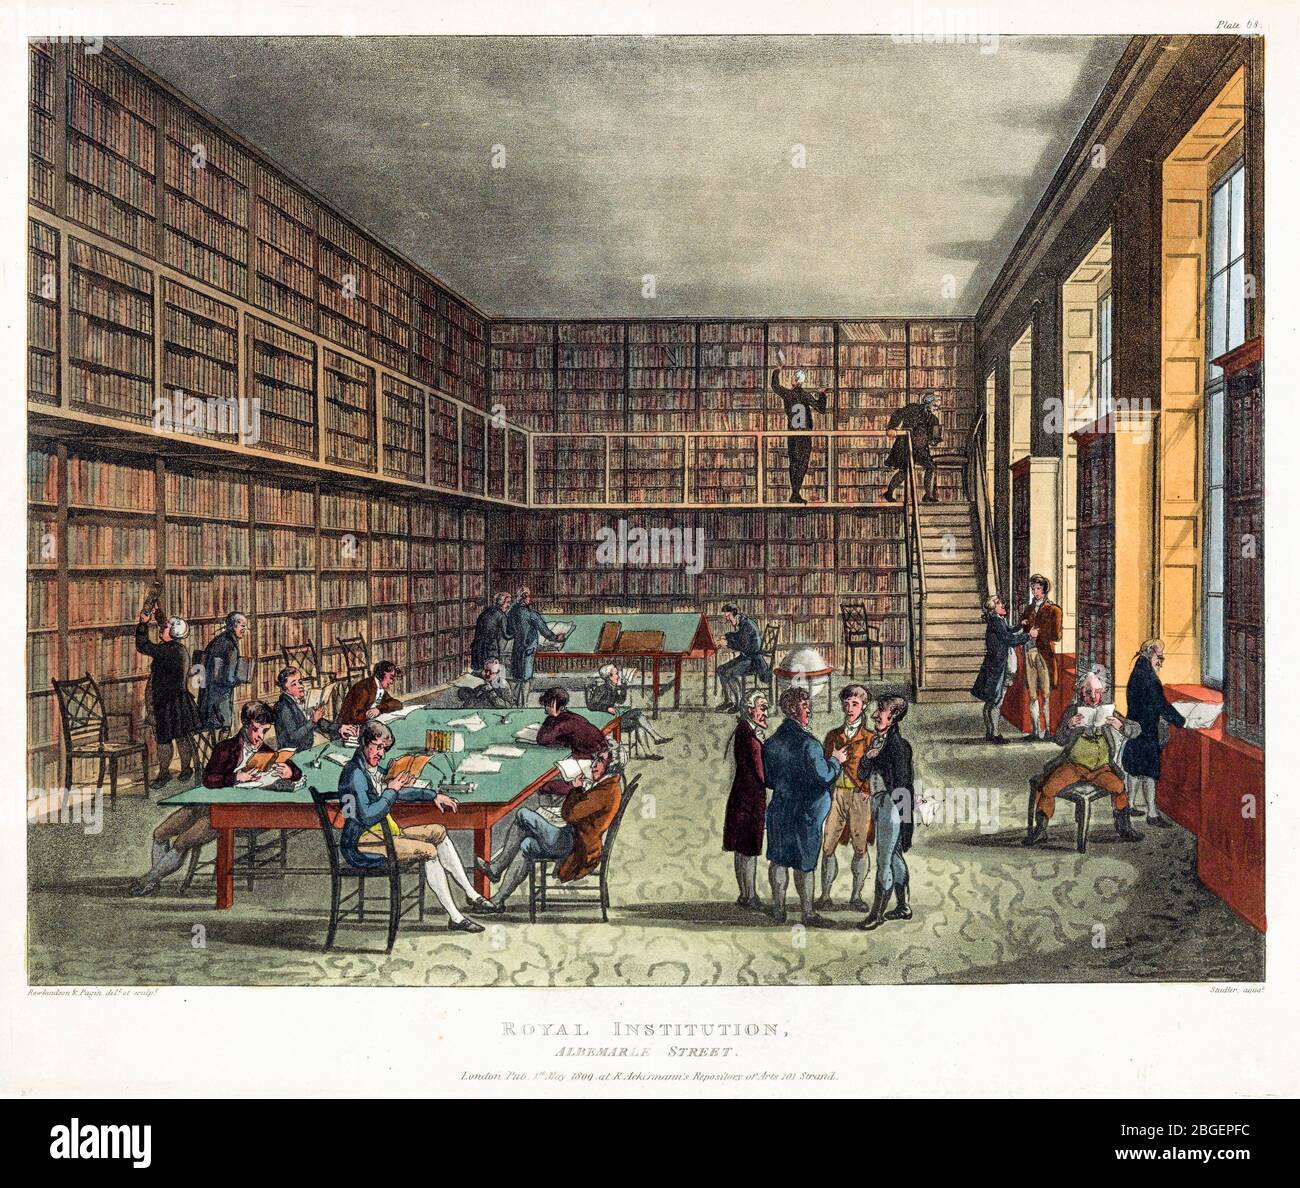 Royal Institution Library, Albemarle Street, etching by Thomas Rowlandson and Augustus Charles Pugin, 1809 Stock Photo